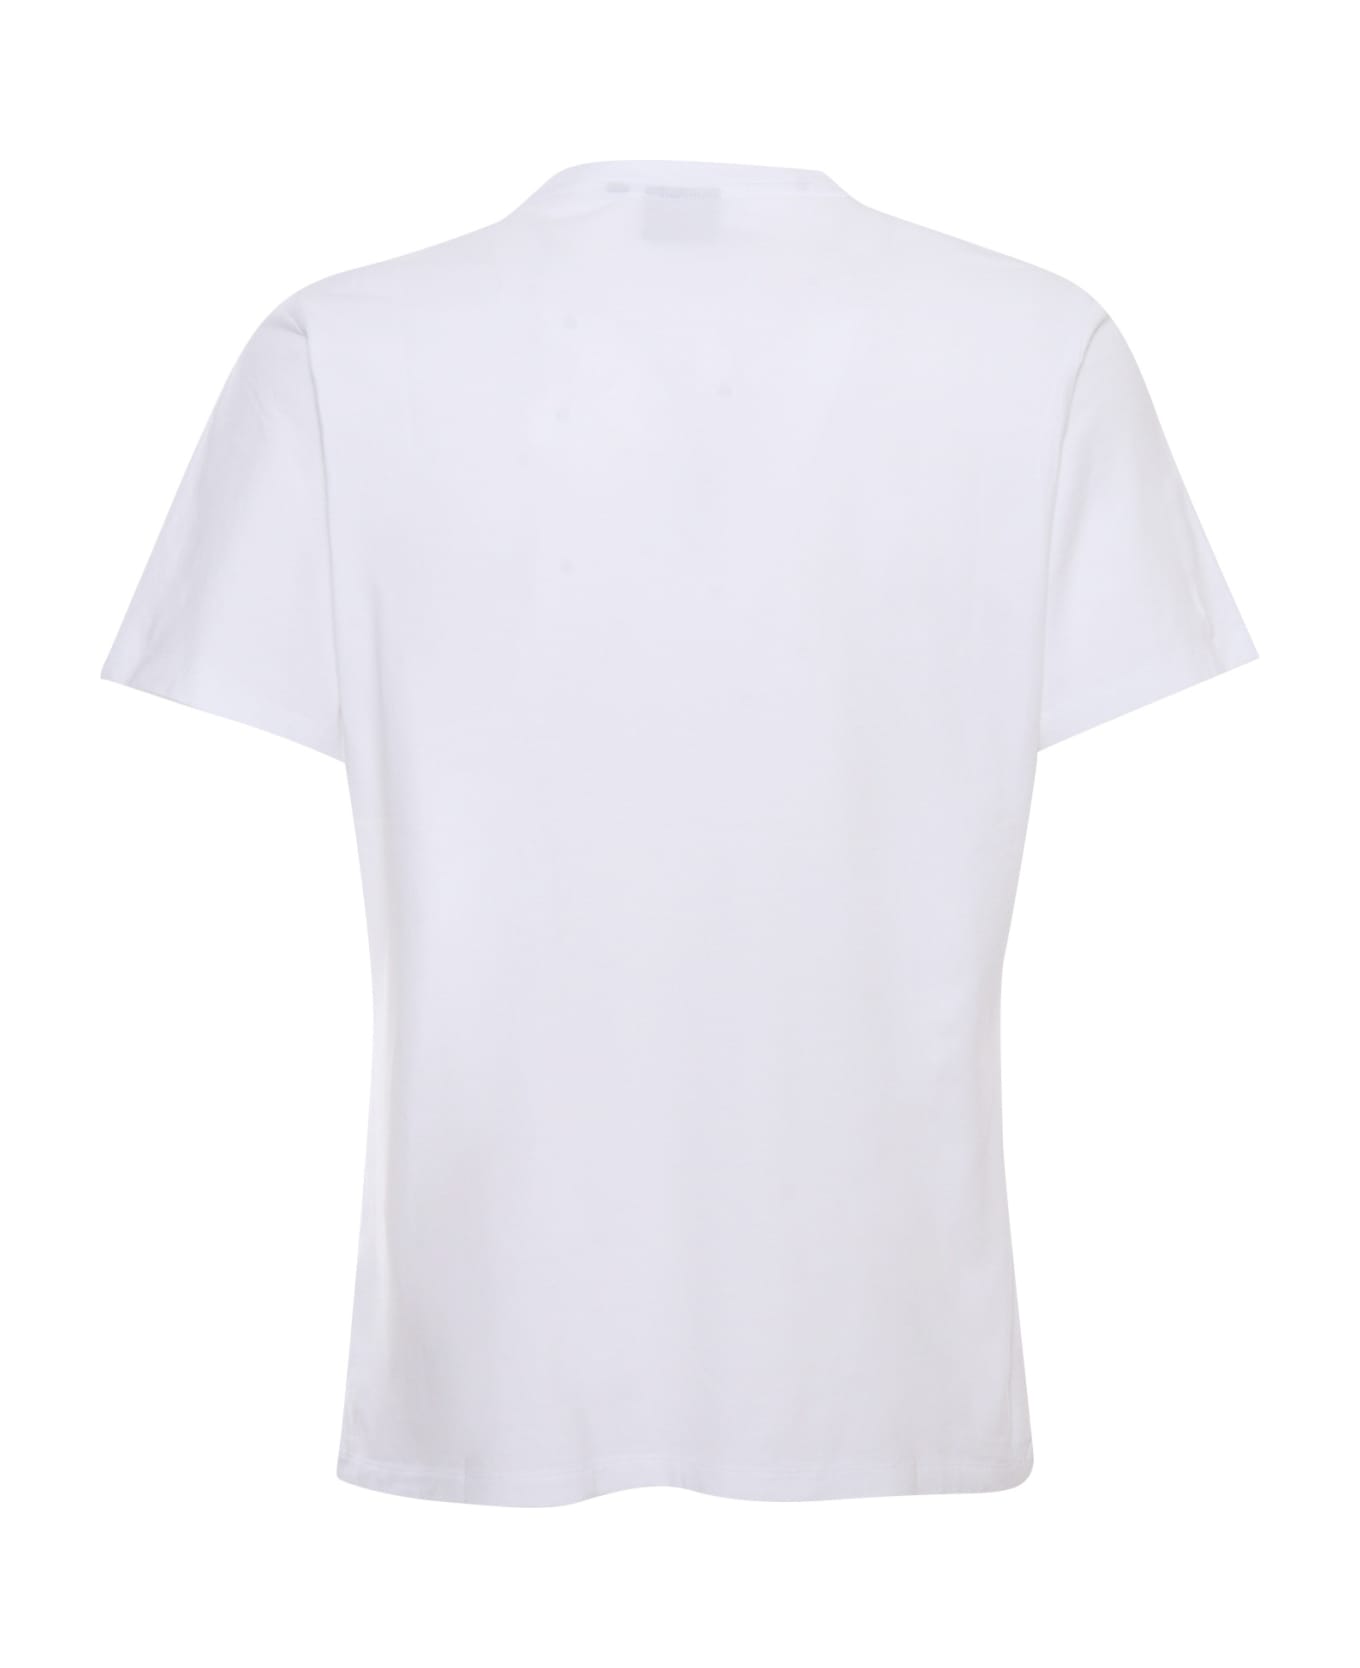 Barbour White T-shirt With Print - WHITE